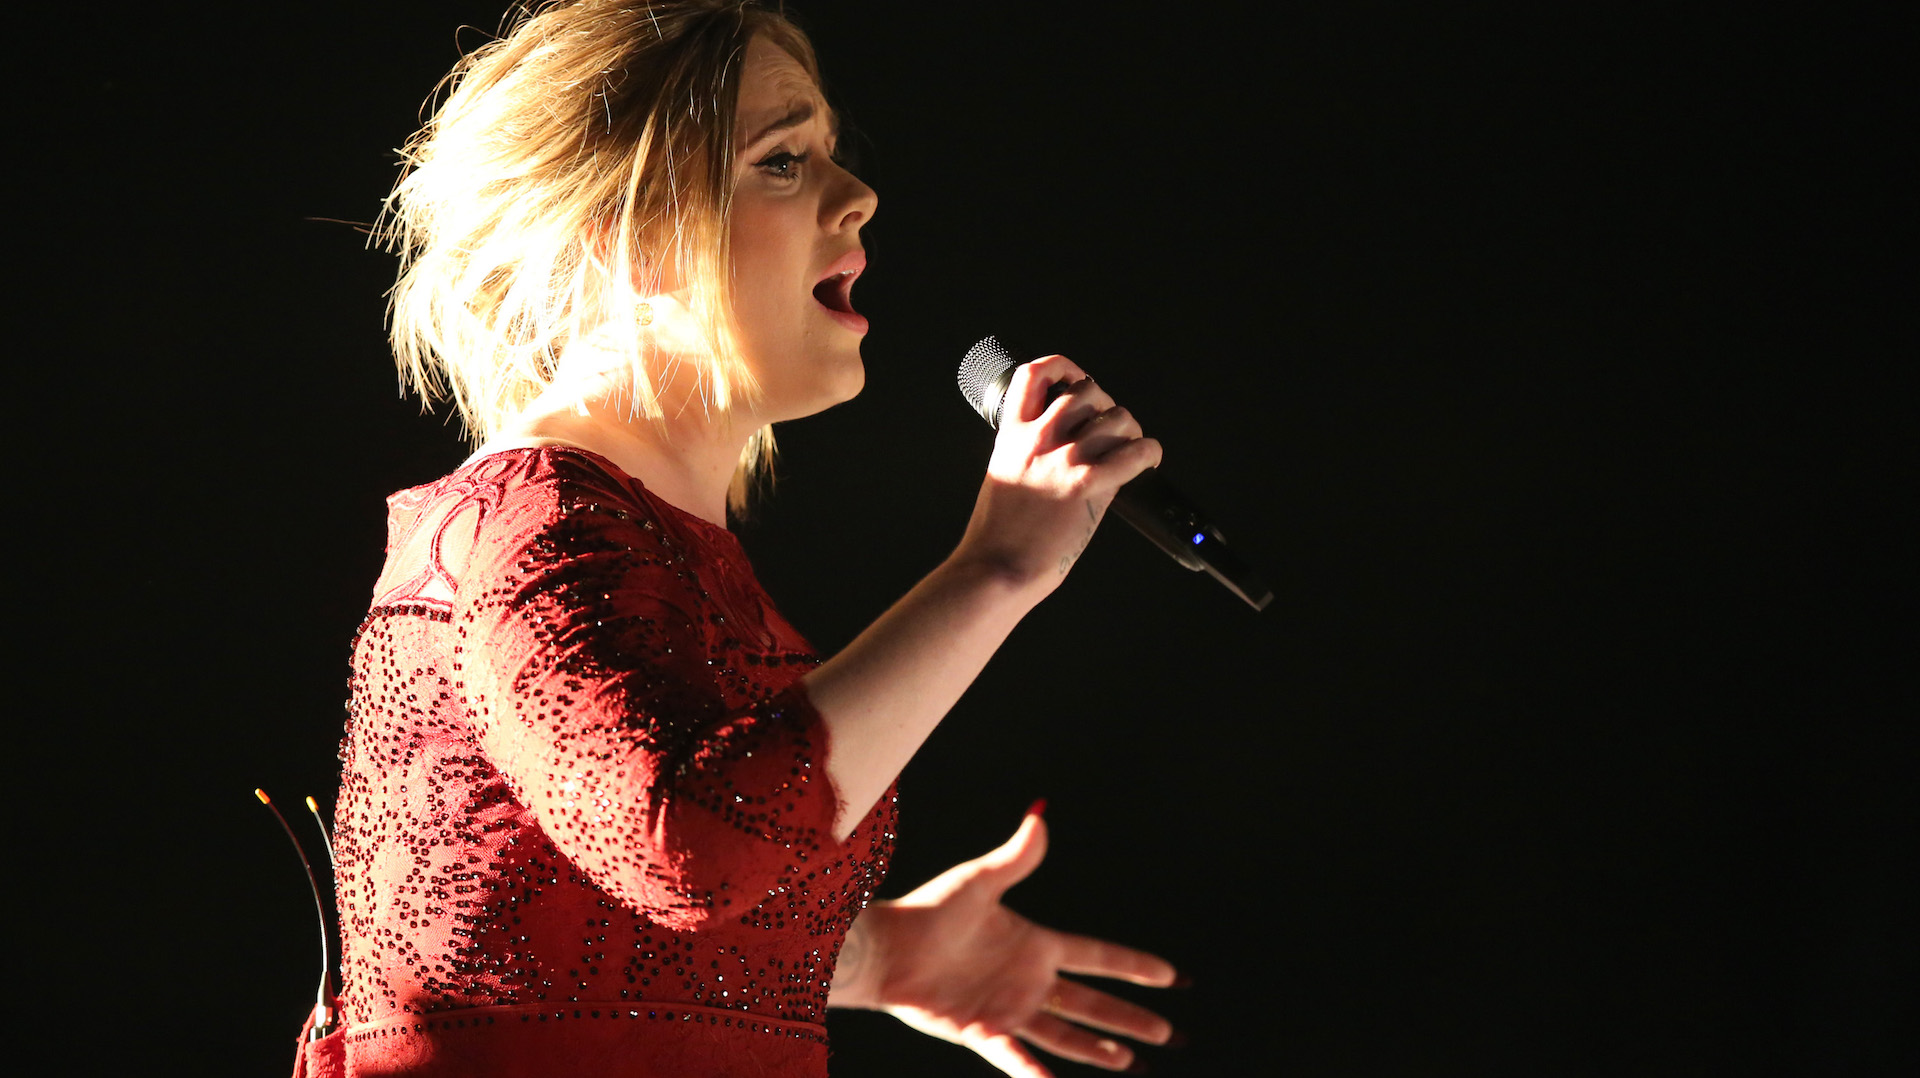 Grammys 2012: Adele Makes a Clean Sweep on Somber Night – Billboard